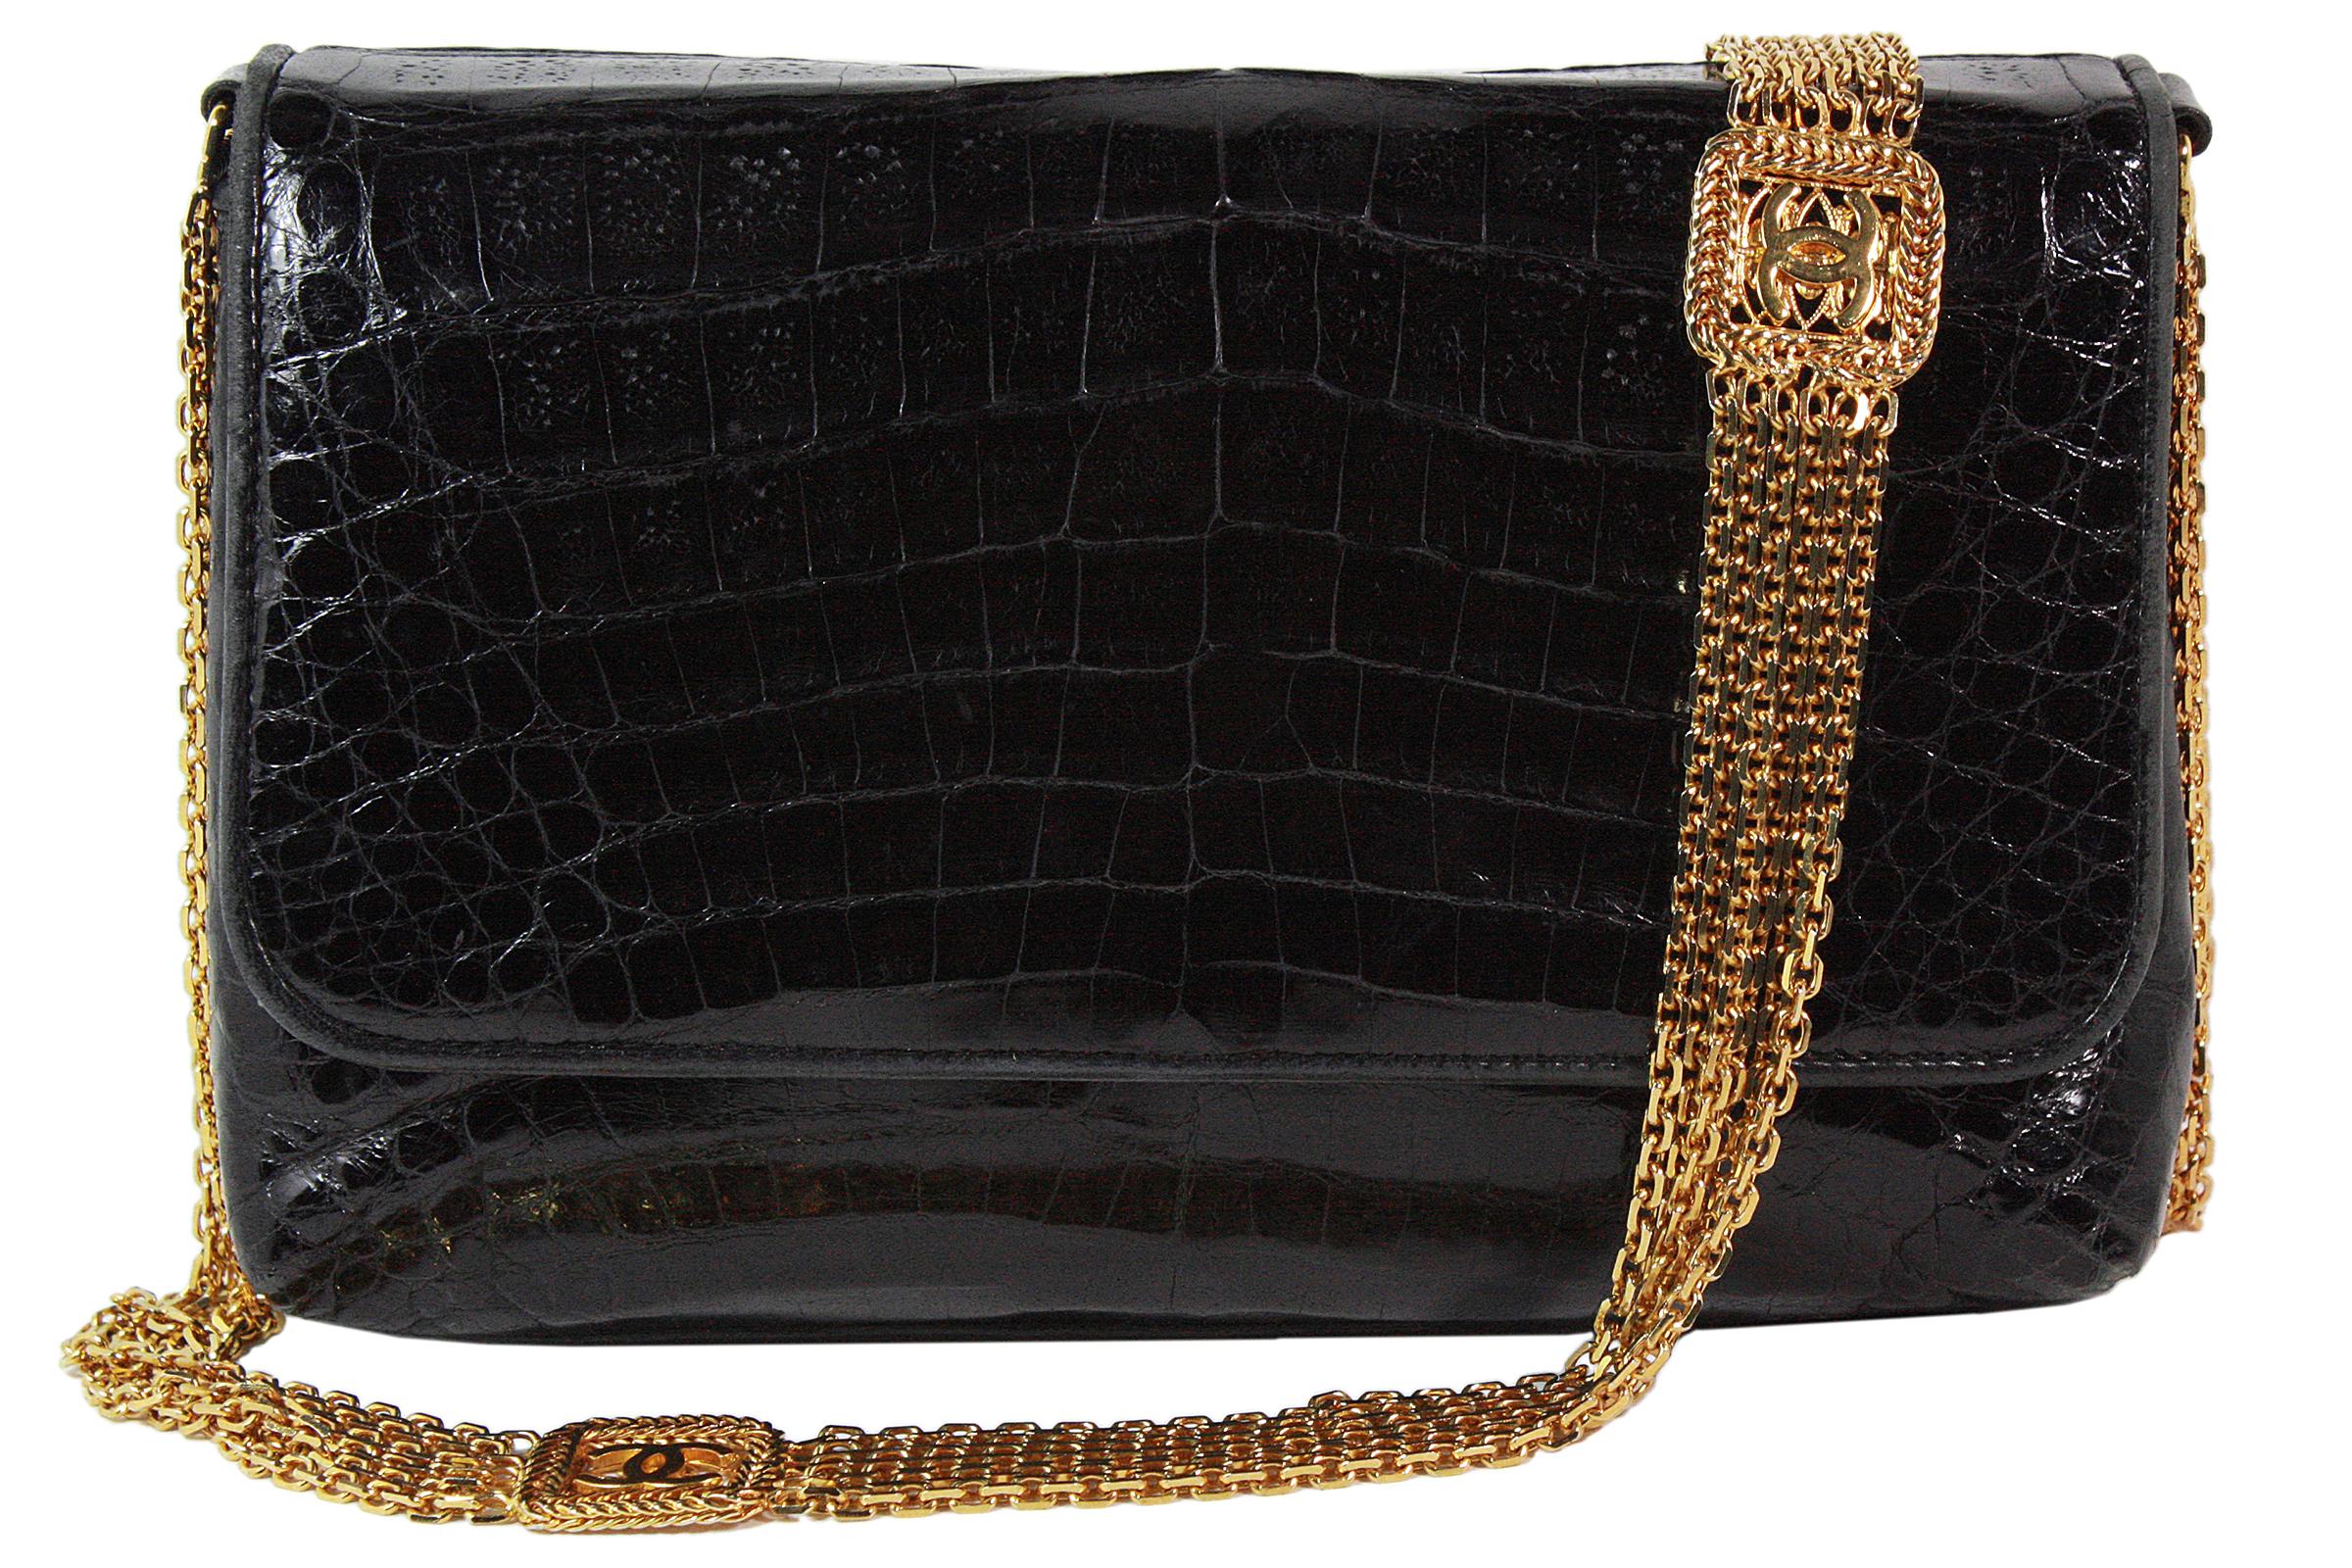 Chanel shoulder bag
Made in Italy
Black crocodile leather 
Gold multi-strand chain strap with gold CC logos 
Strap length: 36 inches 
Soft black leather lining 
Interior zippered pocket
Comes with dustbag
Authenticity card with serial number: 0420683